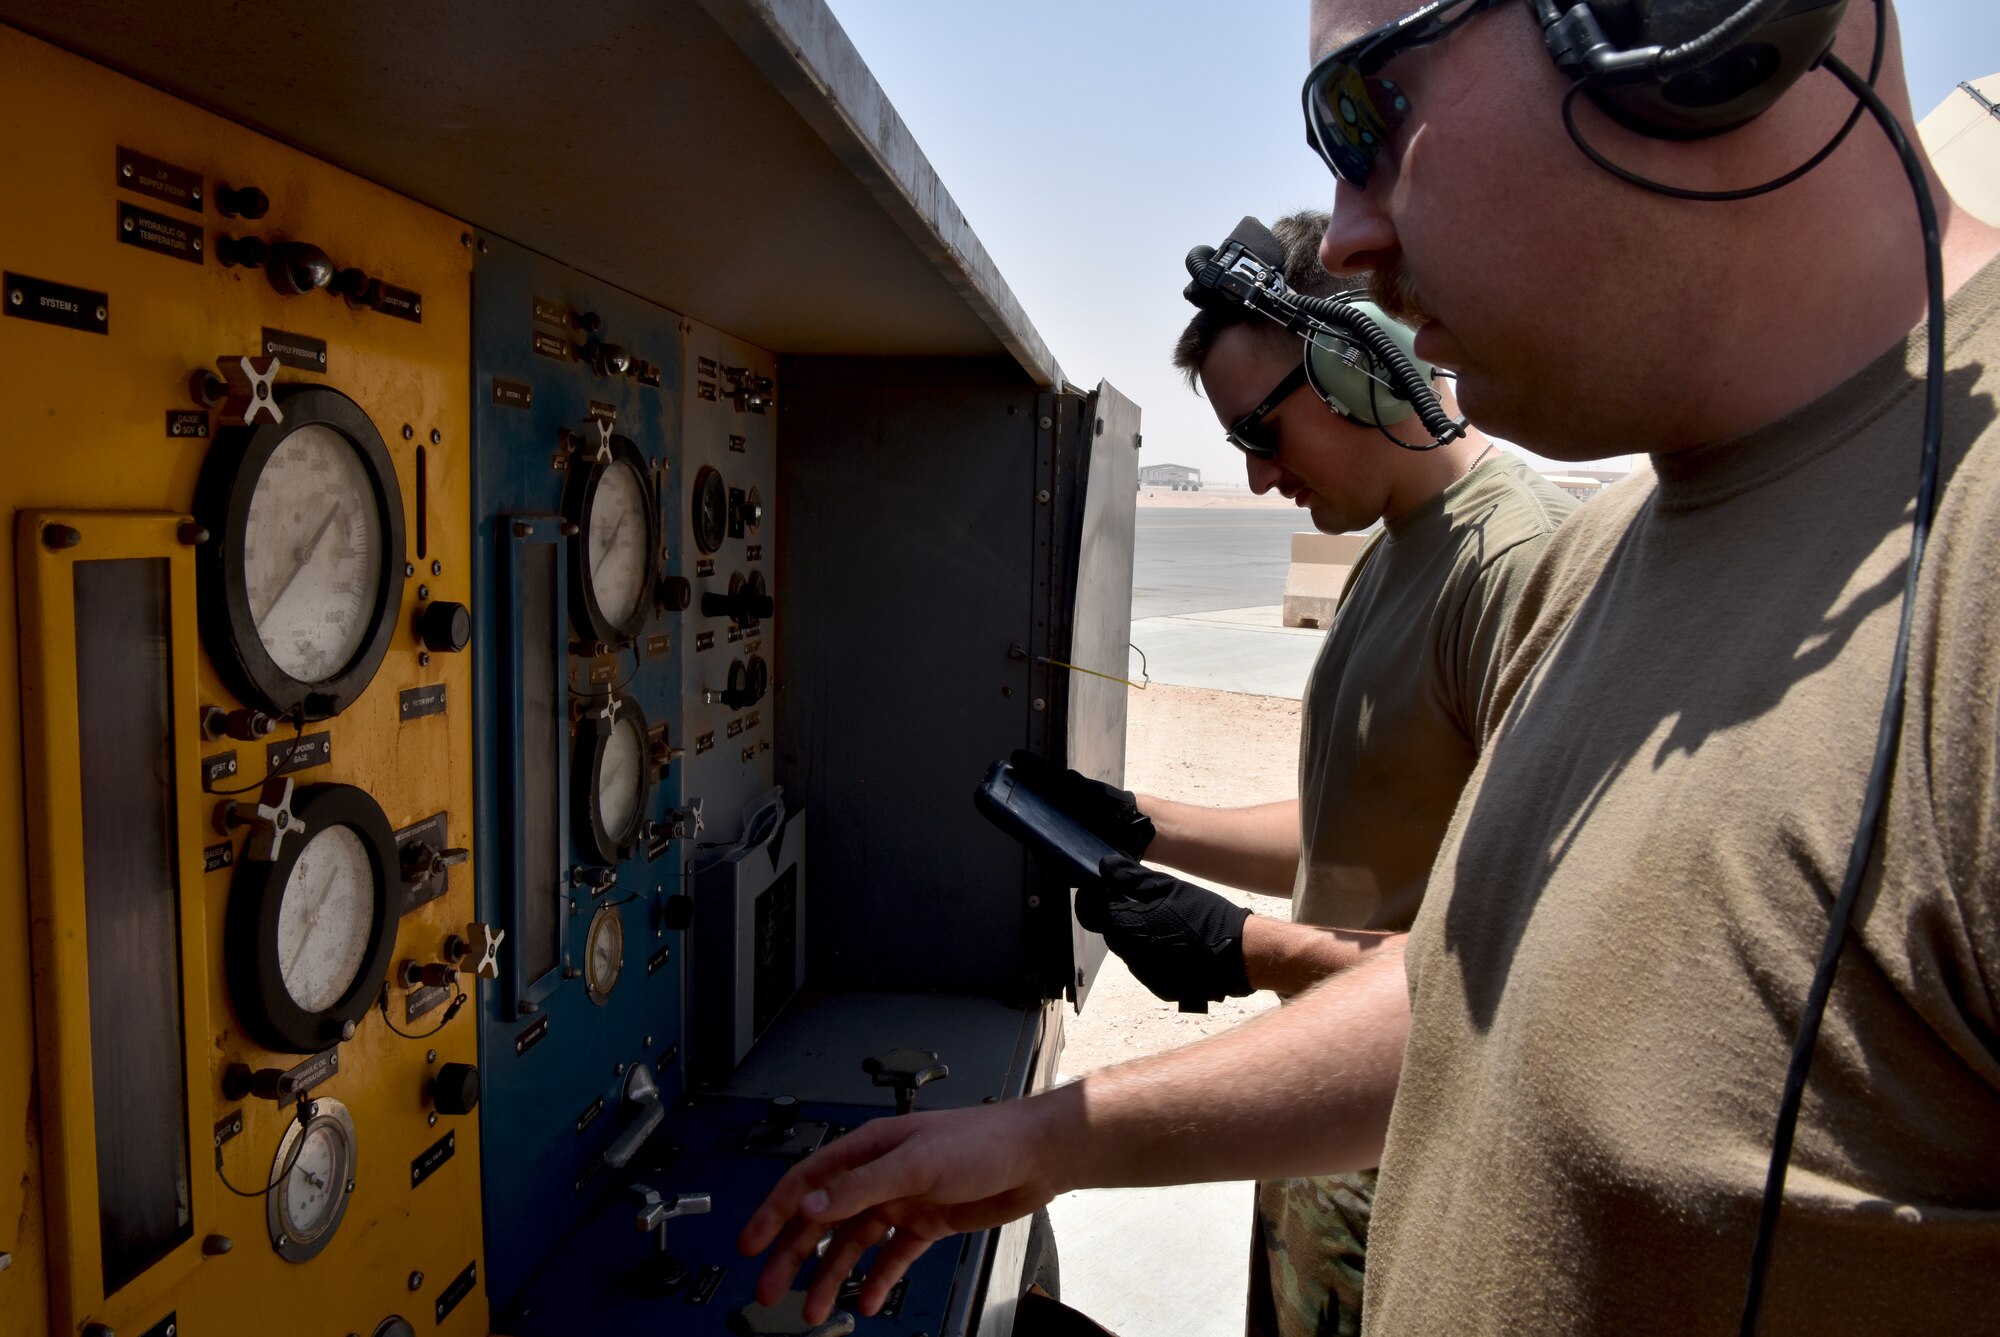 Airmen from the 378th Expeditionary Maintenance Squadron use innovation to test aircraft components at Prince Sultan Air Base, Kingdom of Saudi Arabia.